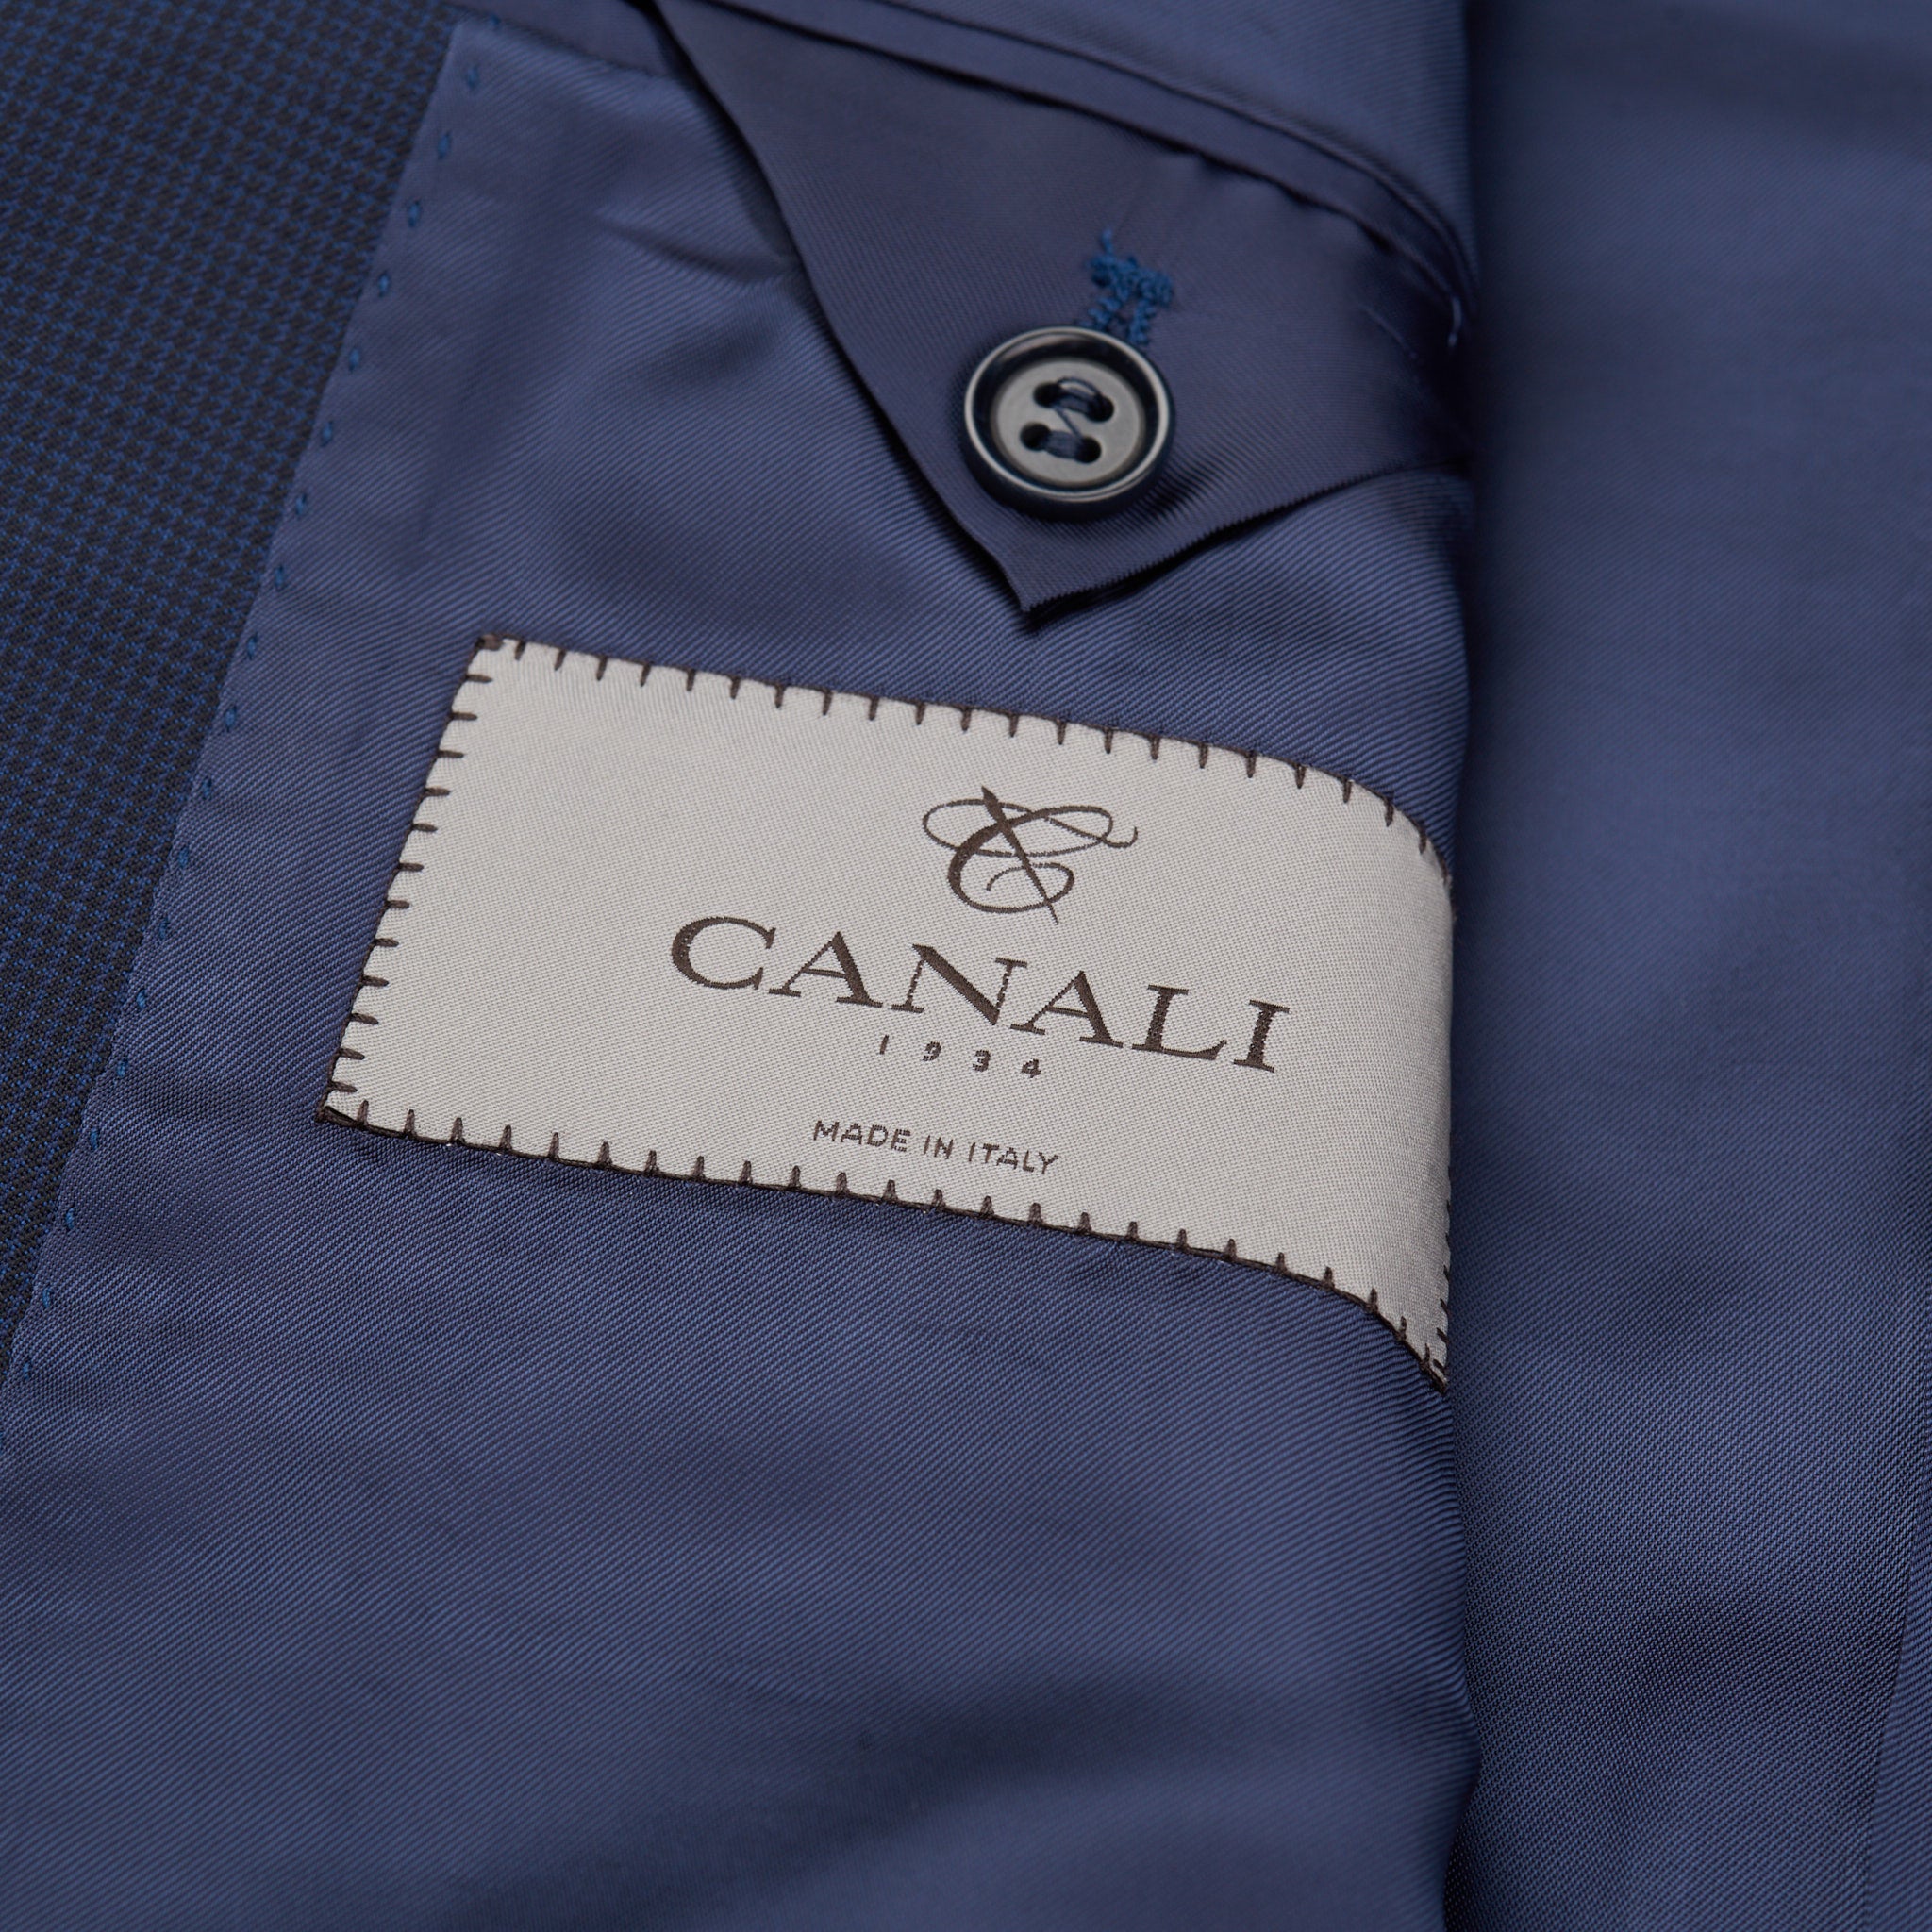 CANALI 1934 Navy Blue Patterned Wool Suit EU 58 NEW US 48 Current Model C4 Short Cut CANALI